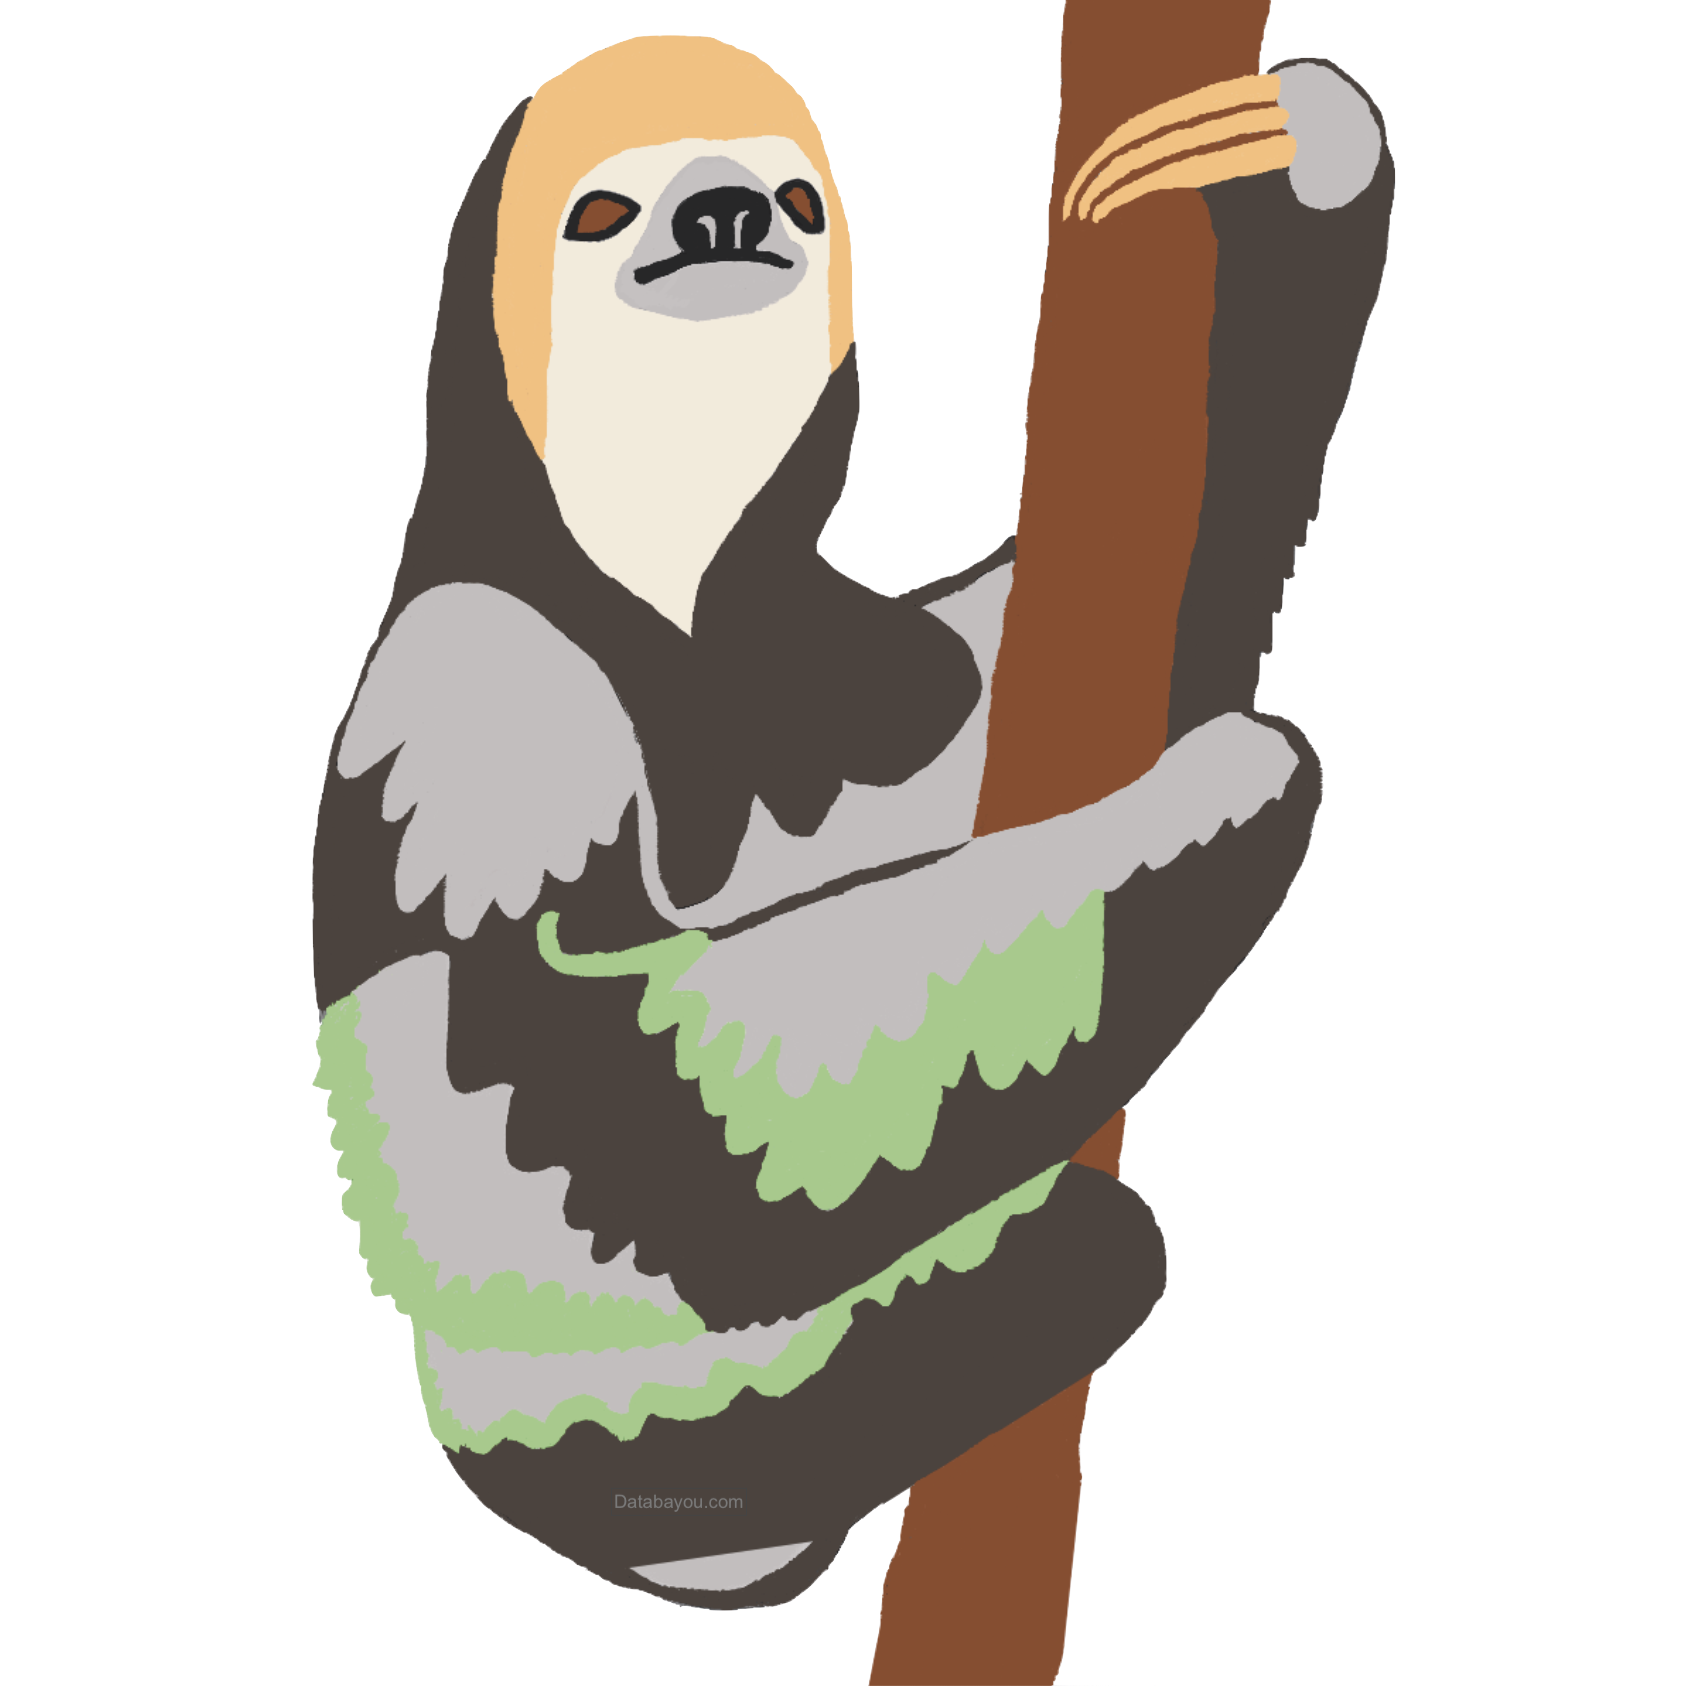 Pale Throated sloth